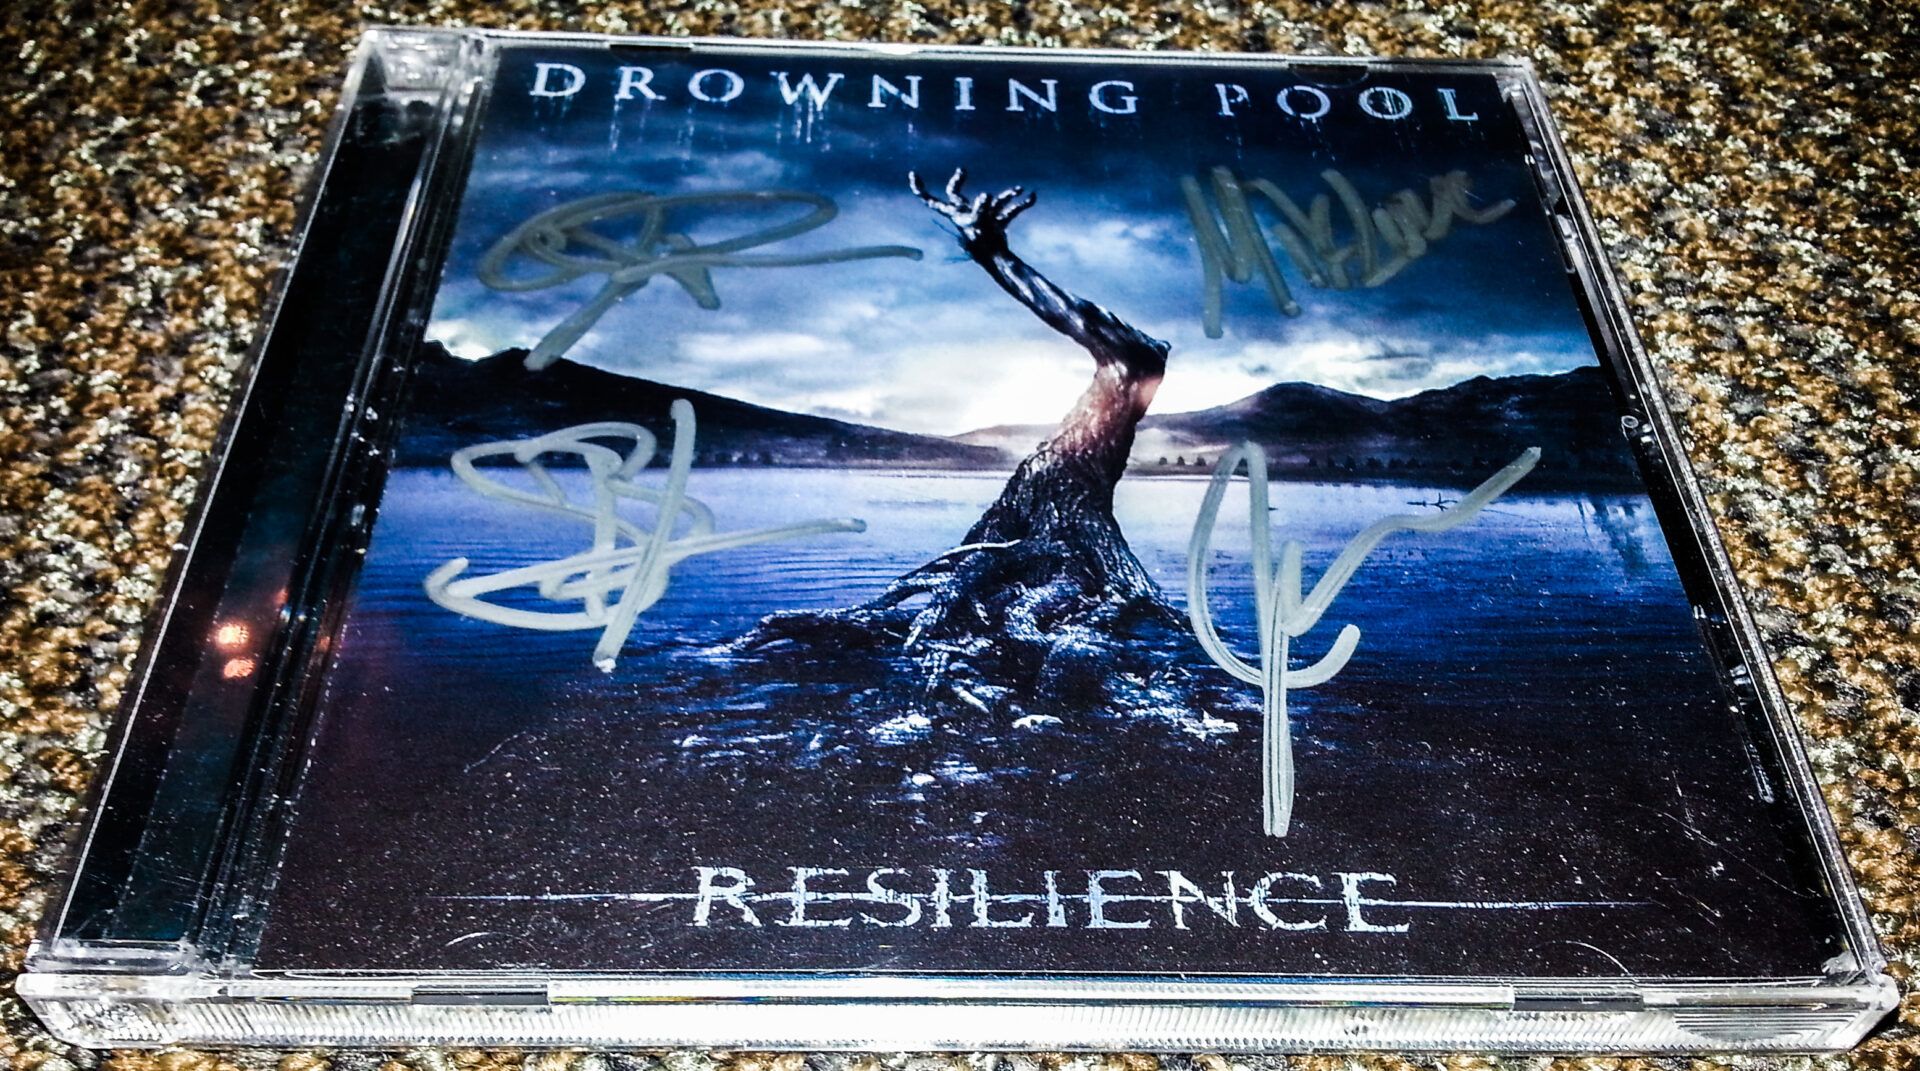 Drowning Pool Signed CD - Contest